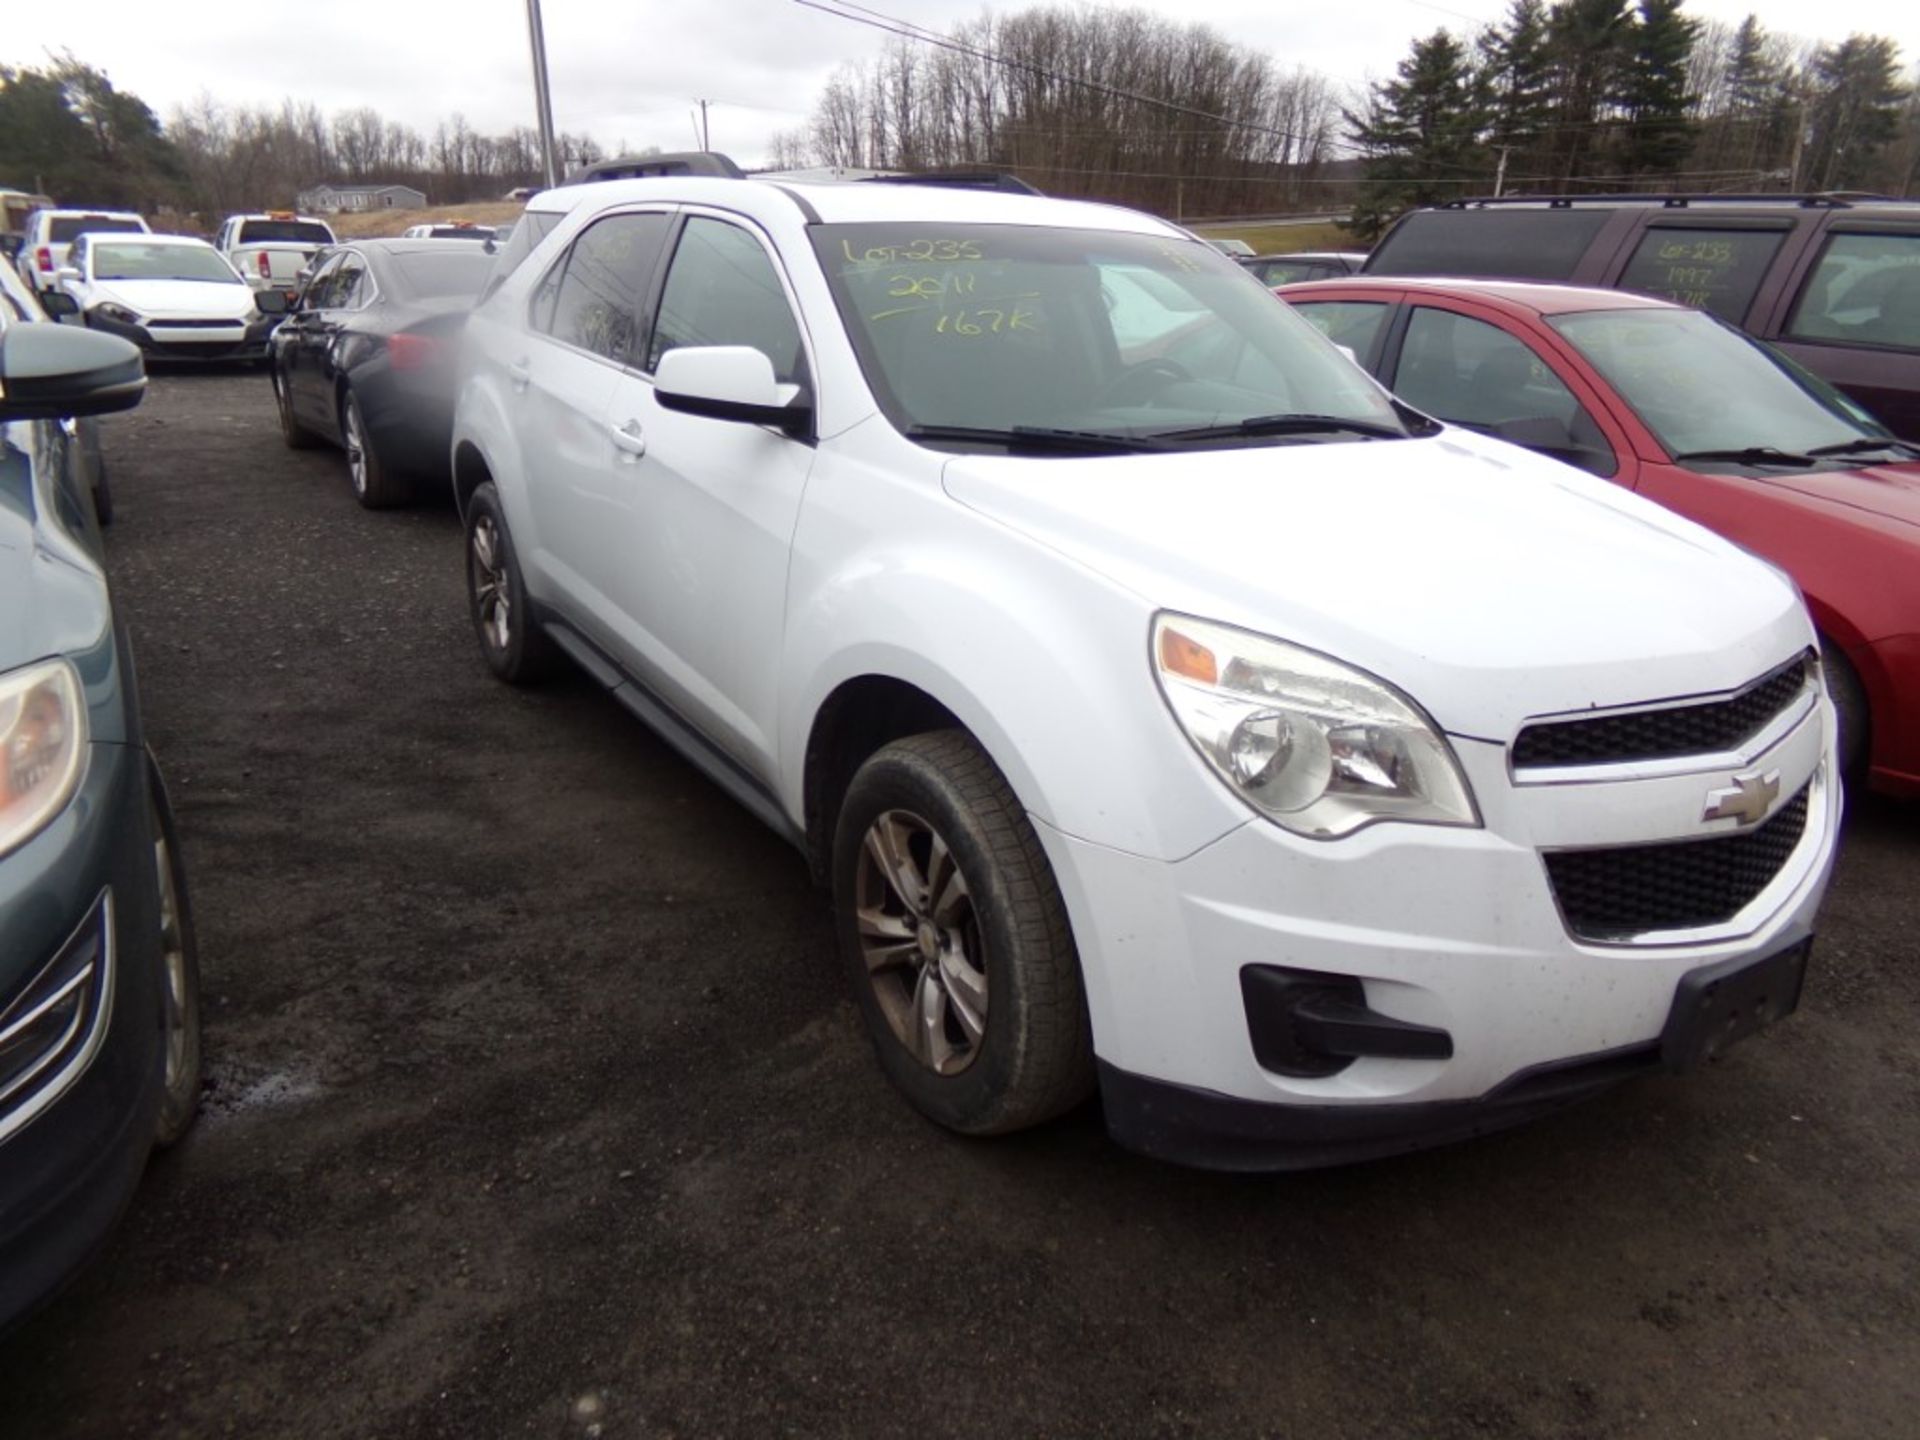 2011 Chevrolet Equinox LT, AWD, Suroof, White, 167,772 Miles, VIN#: 2CNFLEEC1B6326445 - OPEN TO - Image 4 of 6